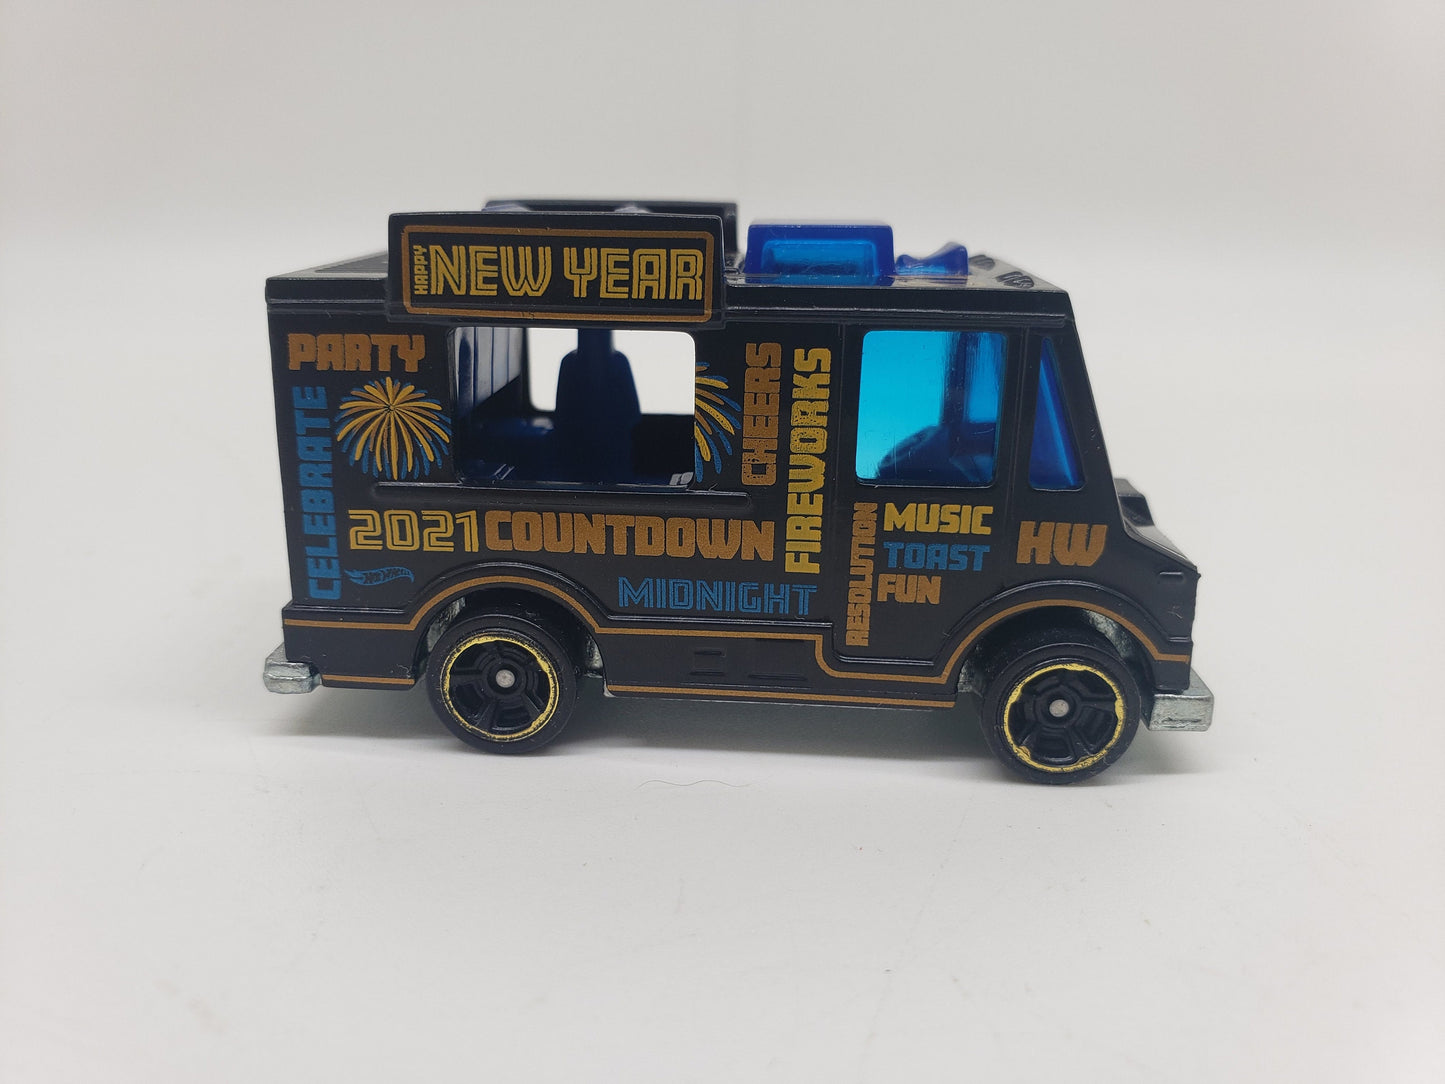 Hot Wheels Good Humor Truck Quick Bite Black Happy New Year Holiday Racers Perfect Birthday Gift Miniature Collectible Scale Model Toy Car